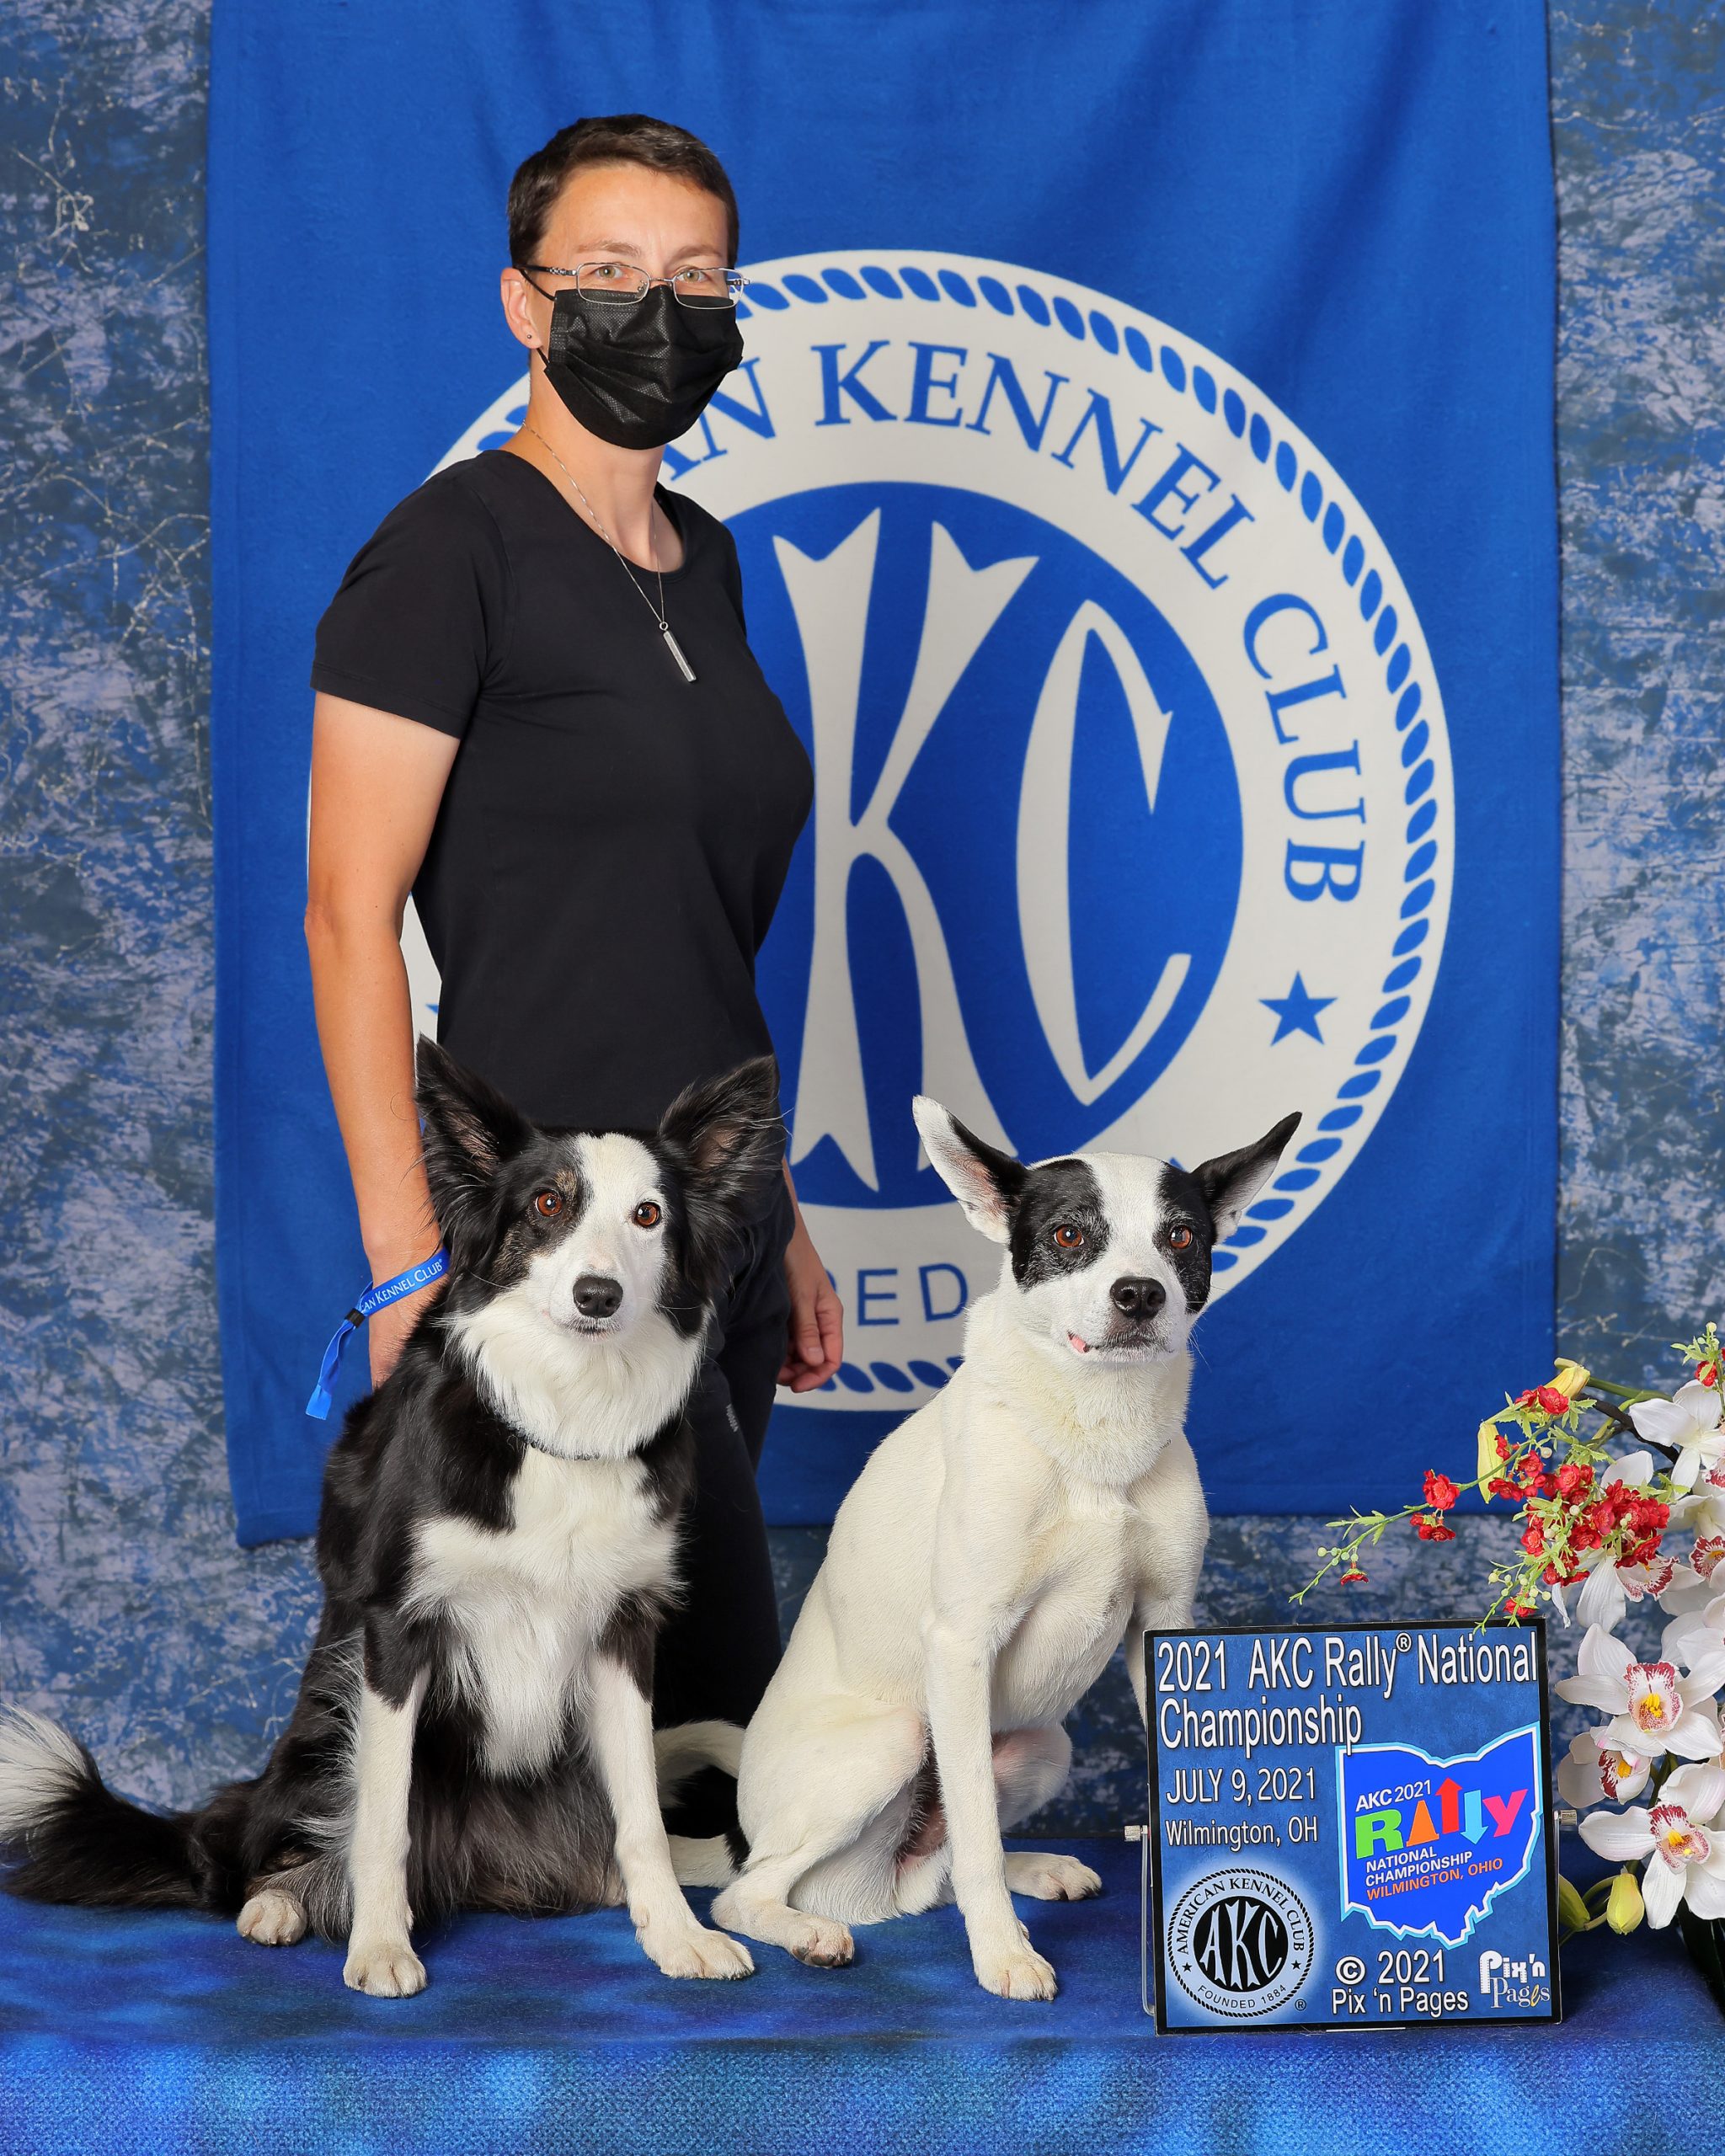 Dog Show Image, Dog Agility, Dog Obedience or Rally, Portrait or Candid